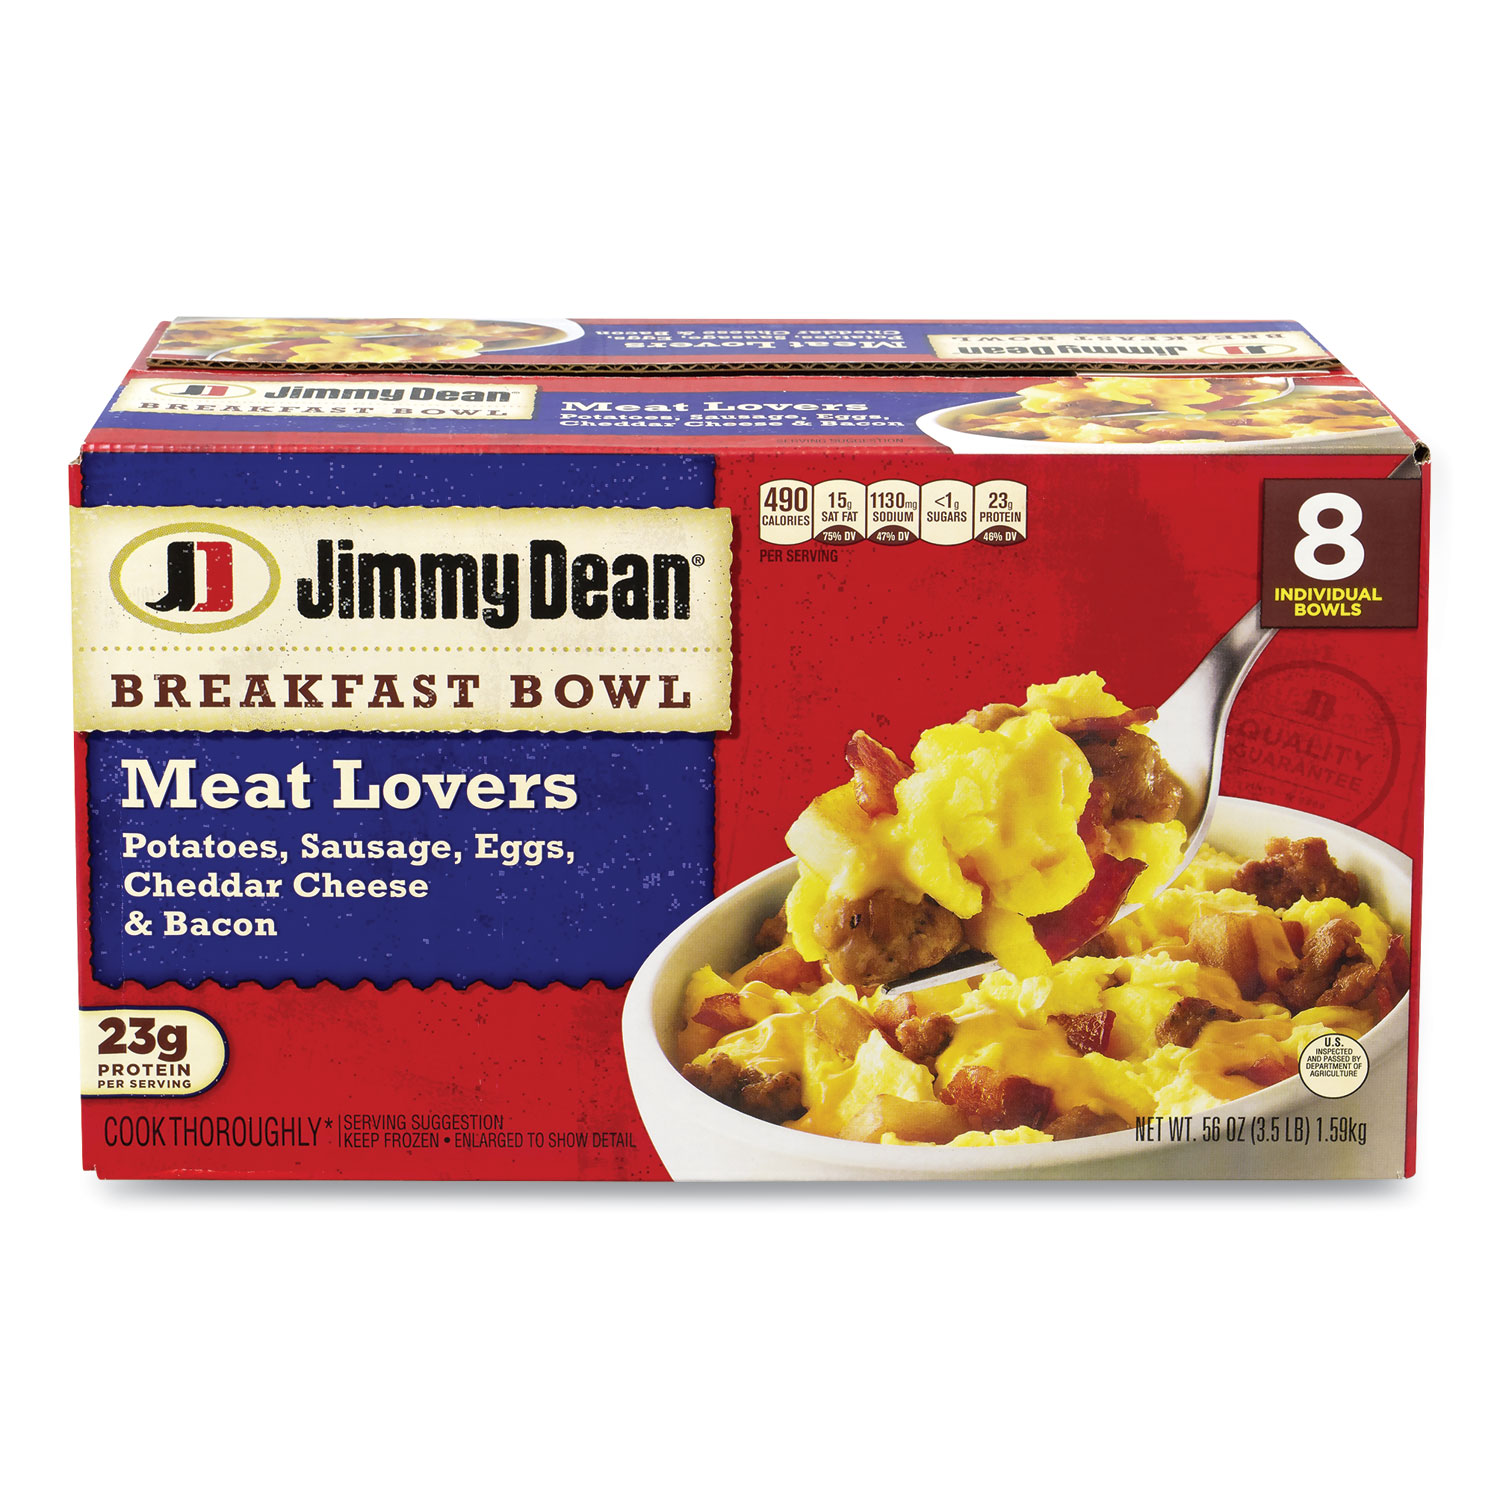  Jimmy Dean 70616 Breakfast Bowl Meat Lovers, 56 oz Box, 8 Bowls/Box, Free Delivery in 1-4 Business Days (GRR90300029) 